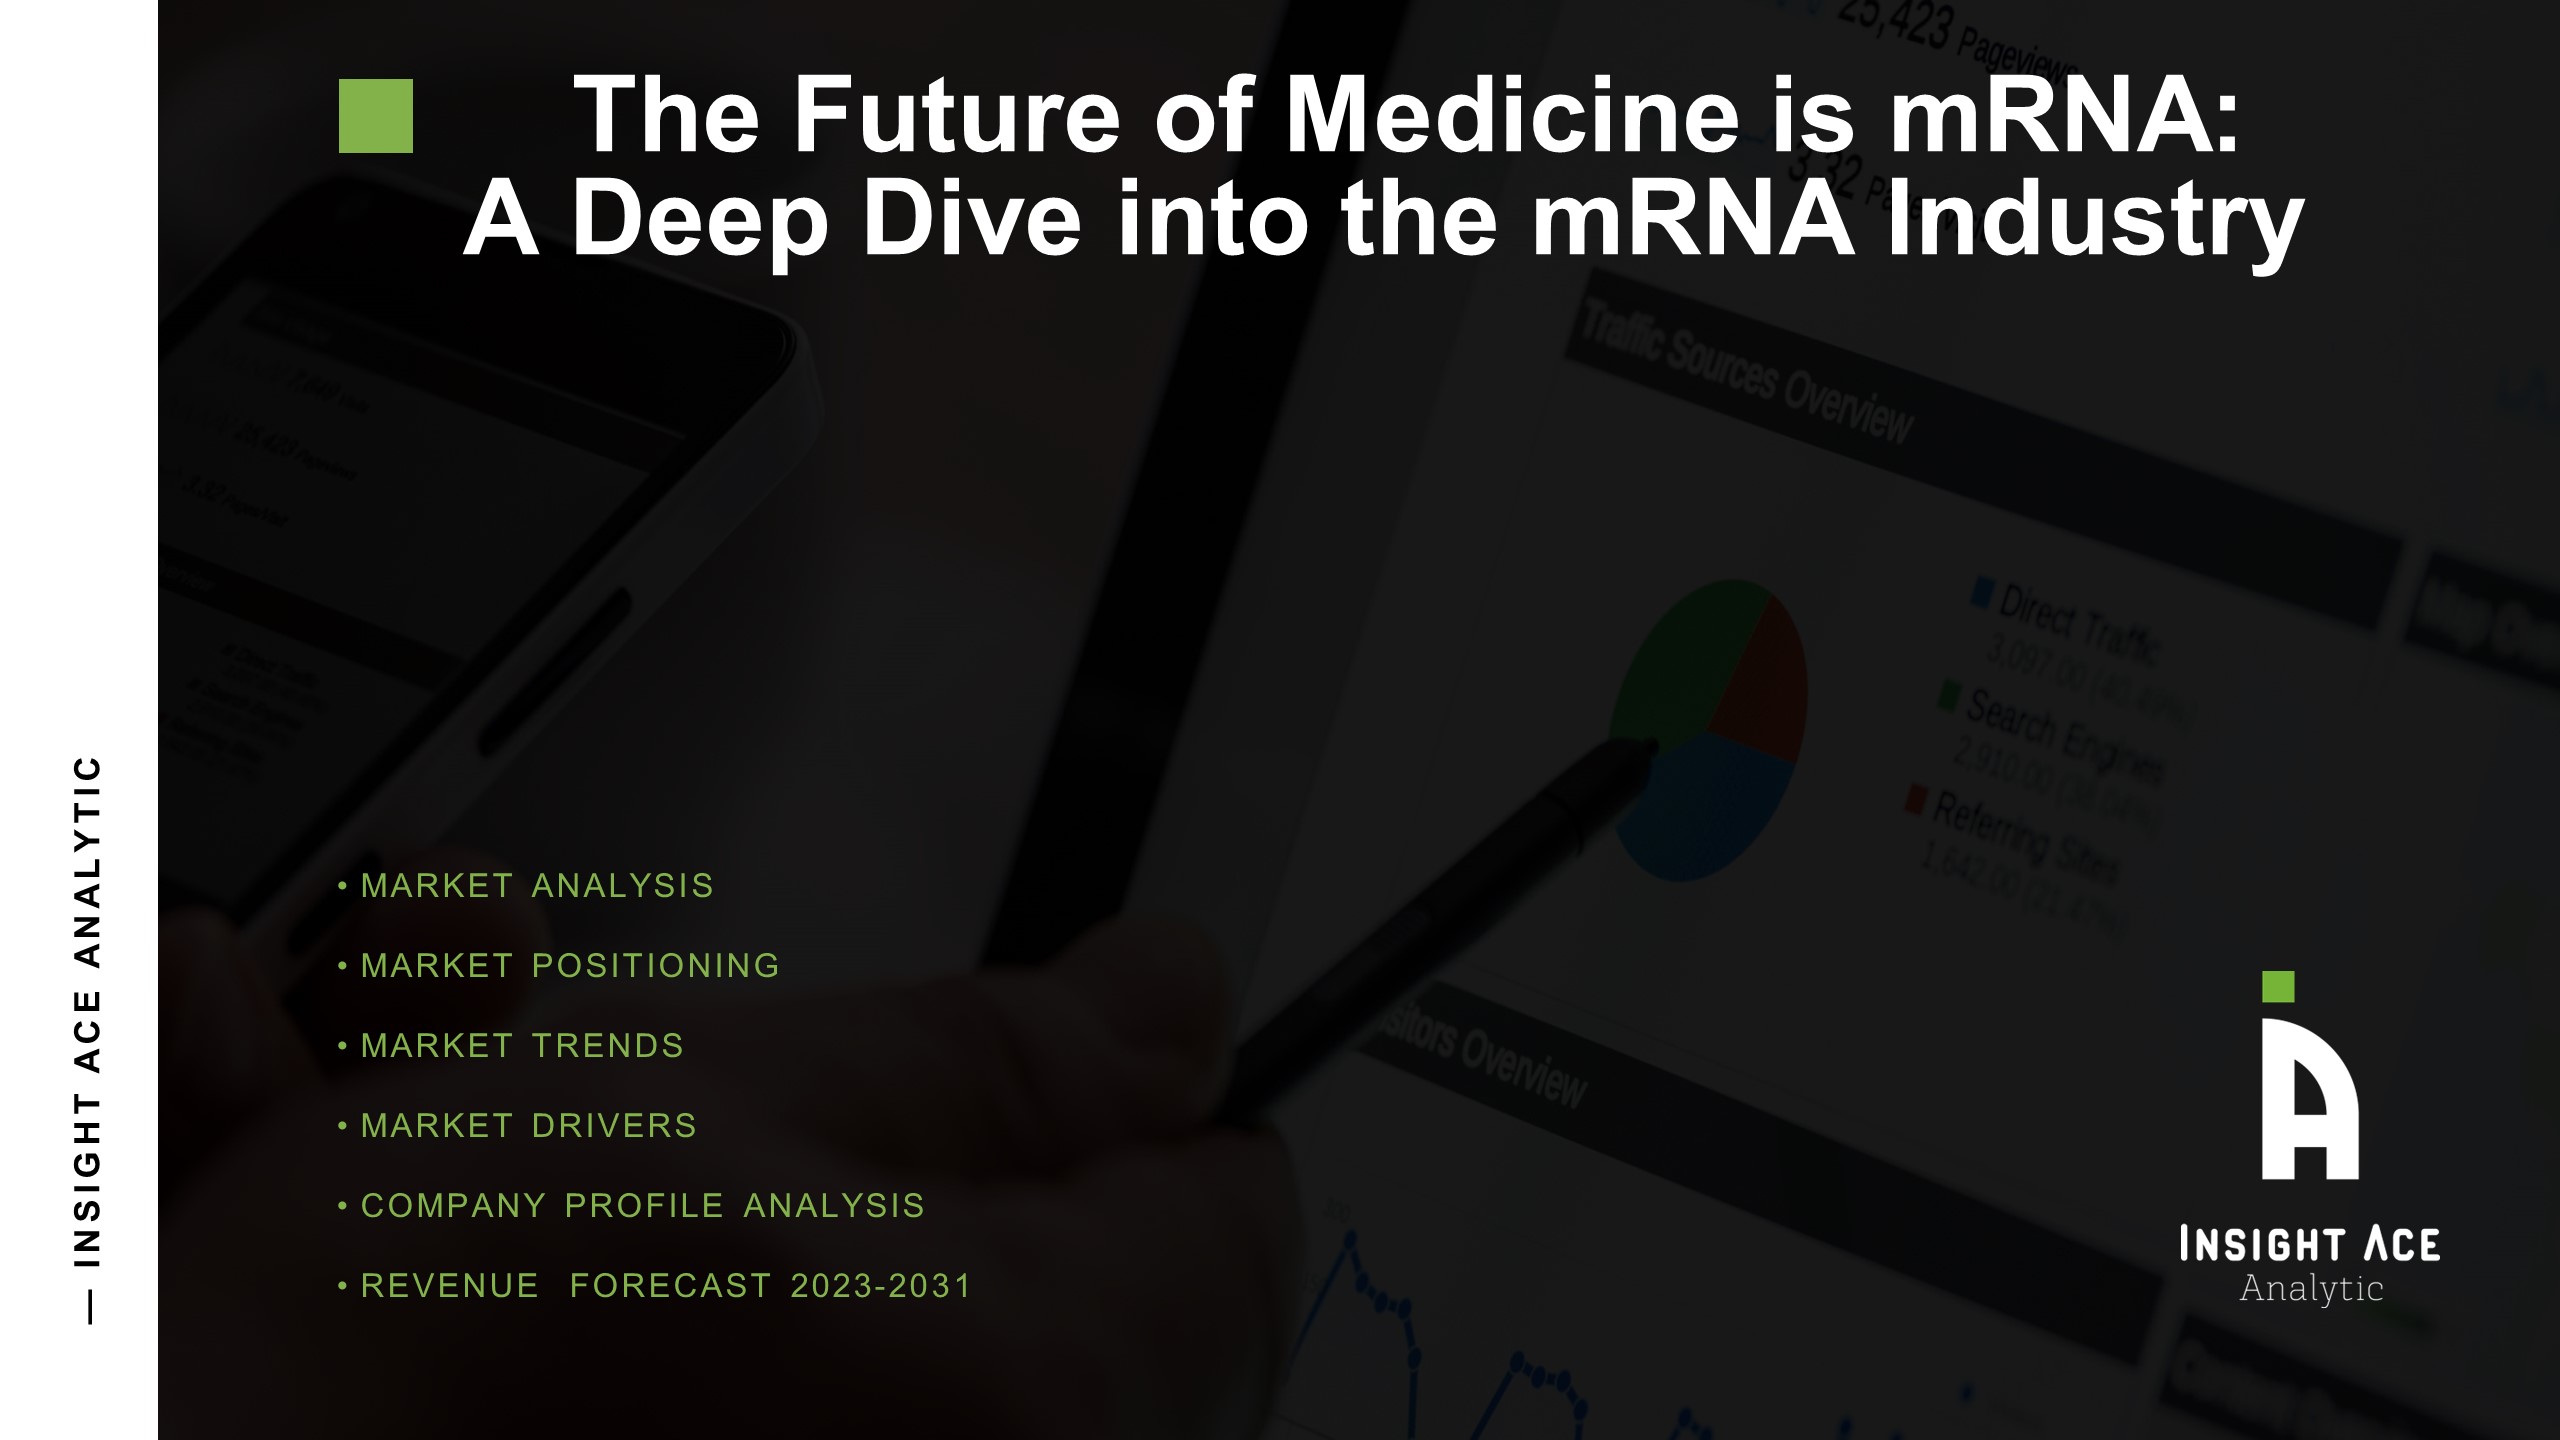 The Future of Medicine is mRNA: A Deep Dive into the mRNA Industry